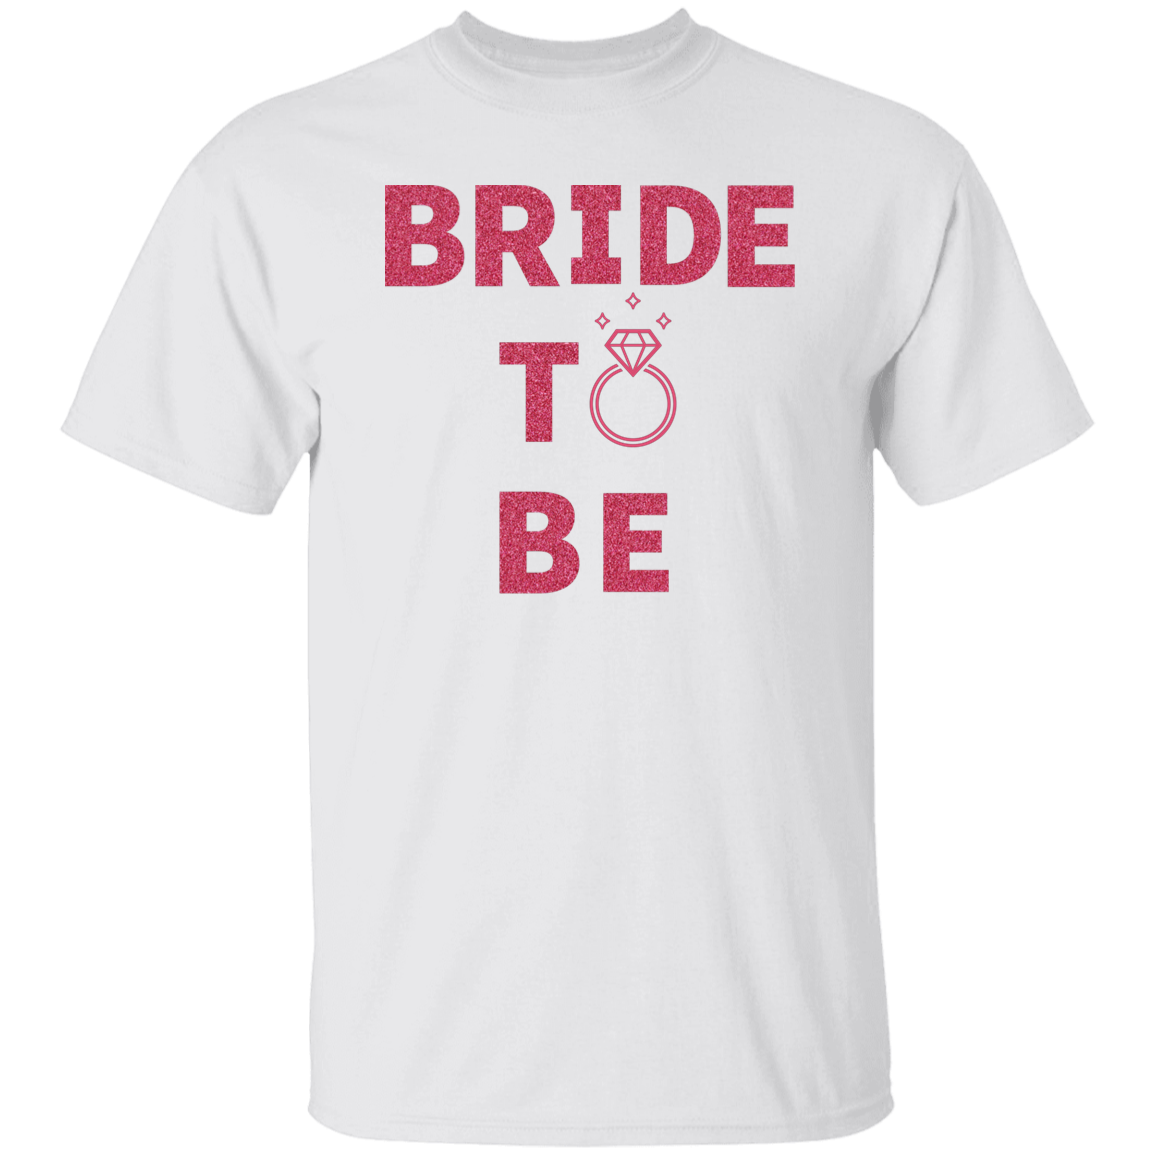 Bride to be pink glitter letters tshirt